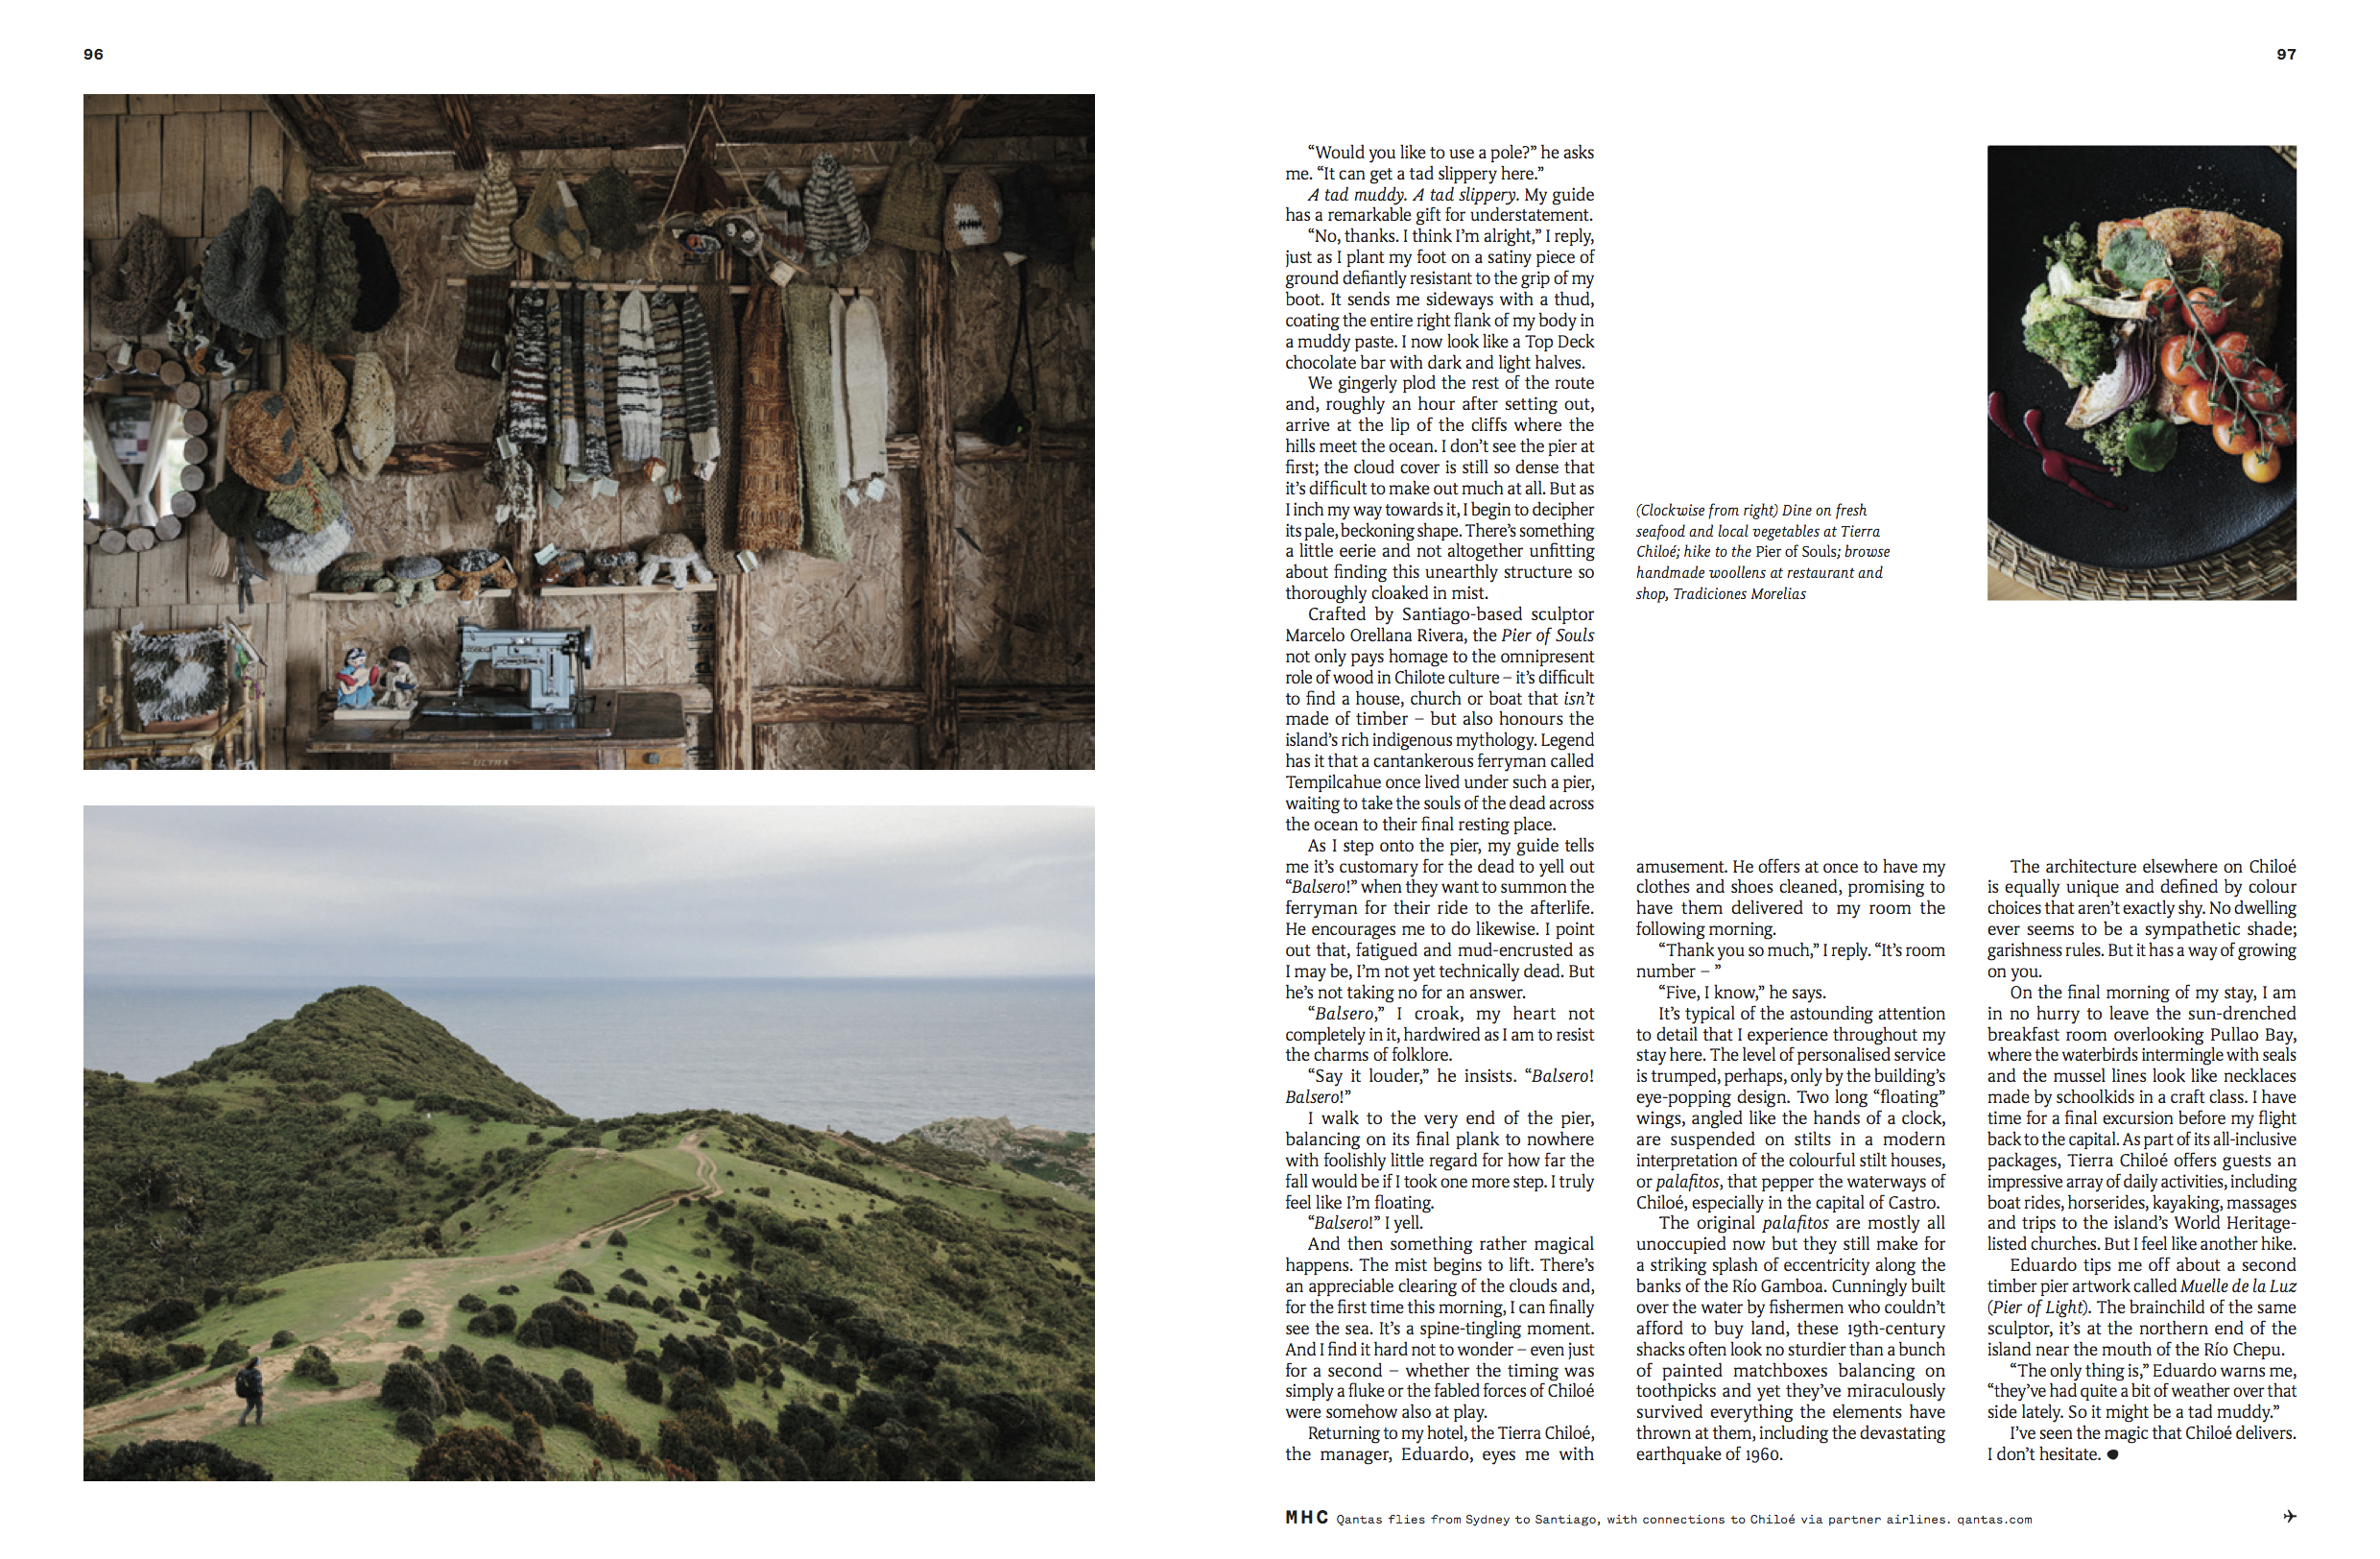 Tear sheet of Natasha Lee's work shows mountains on Chiloé Island, the interior of a local home, and a plate of fresh food